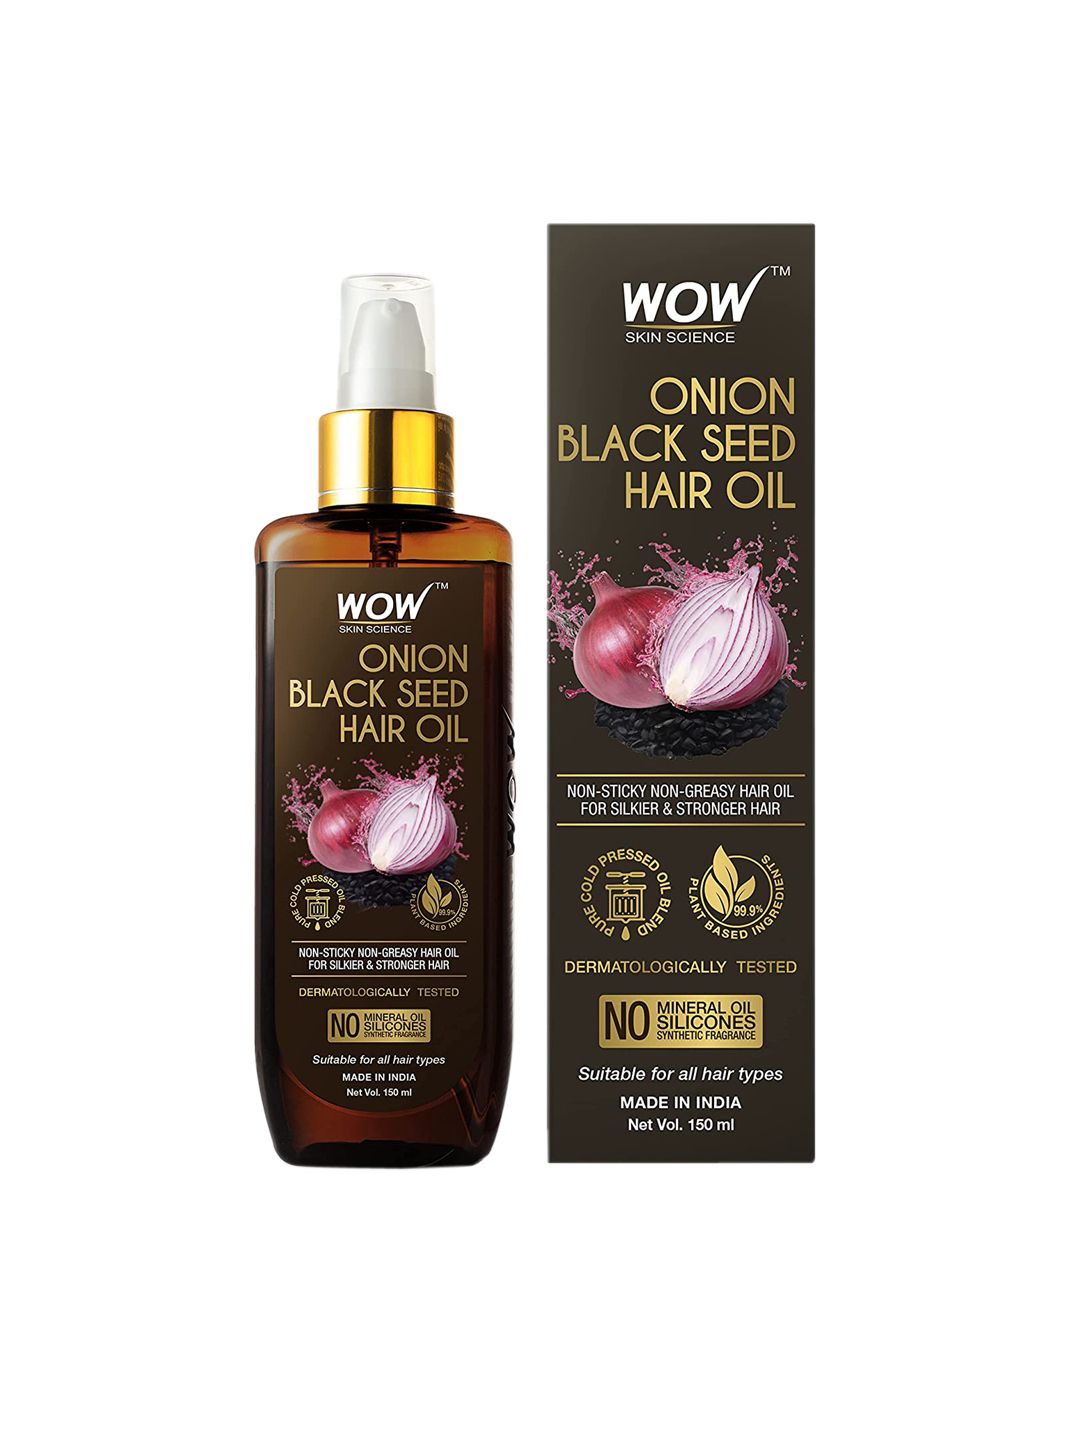 WOW SKIN SCIENCE Brown Onion Black Seed Hair Oil - 150 ml Price in India